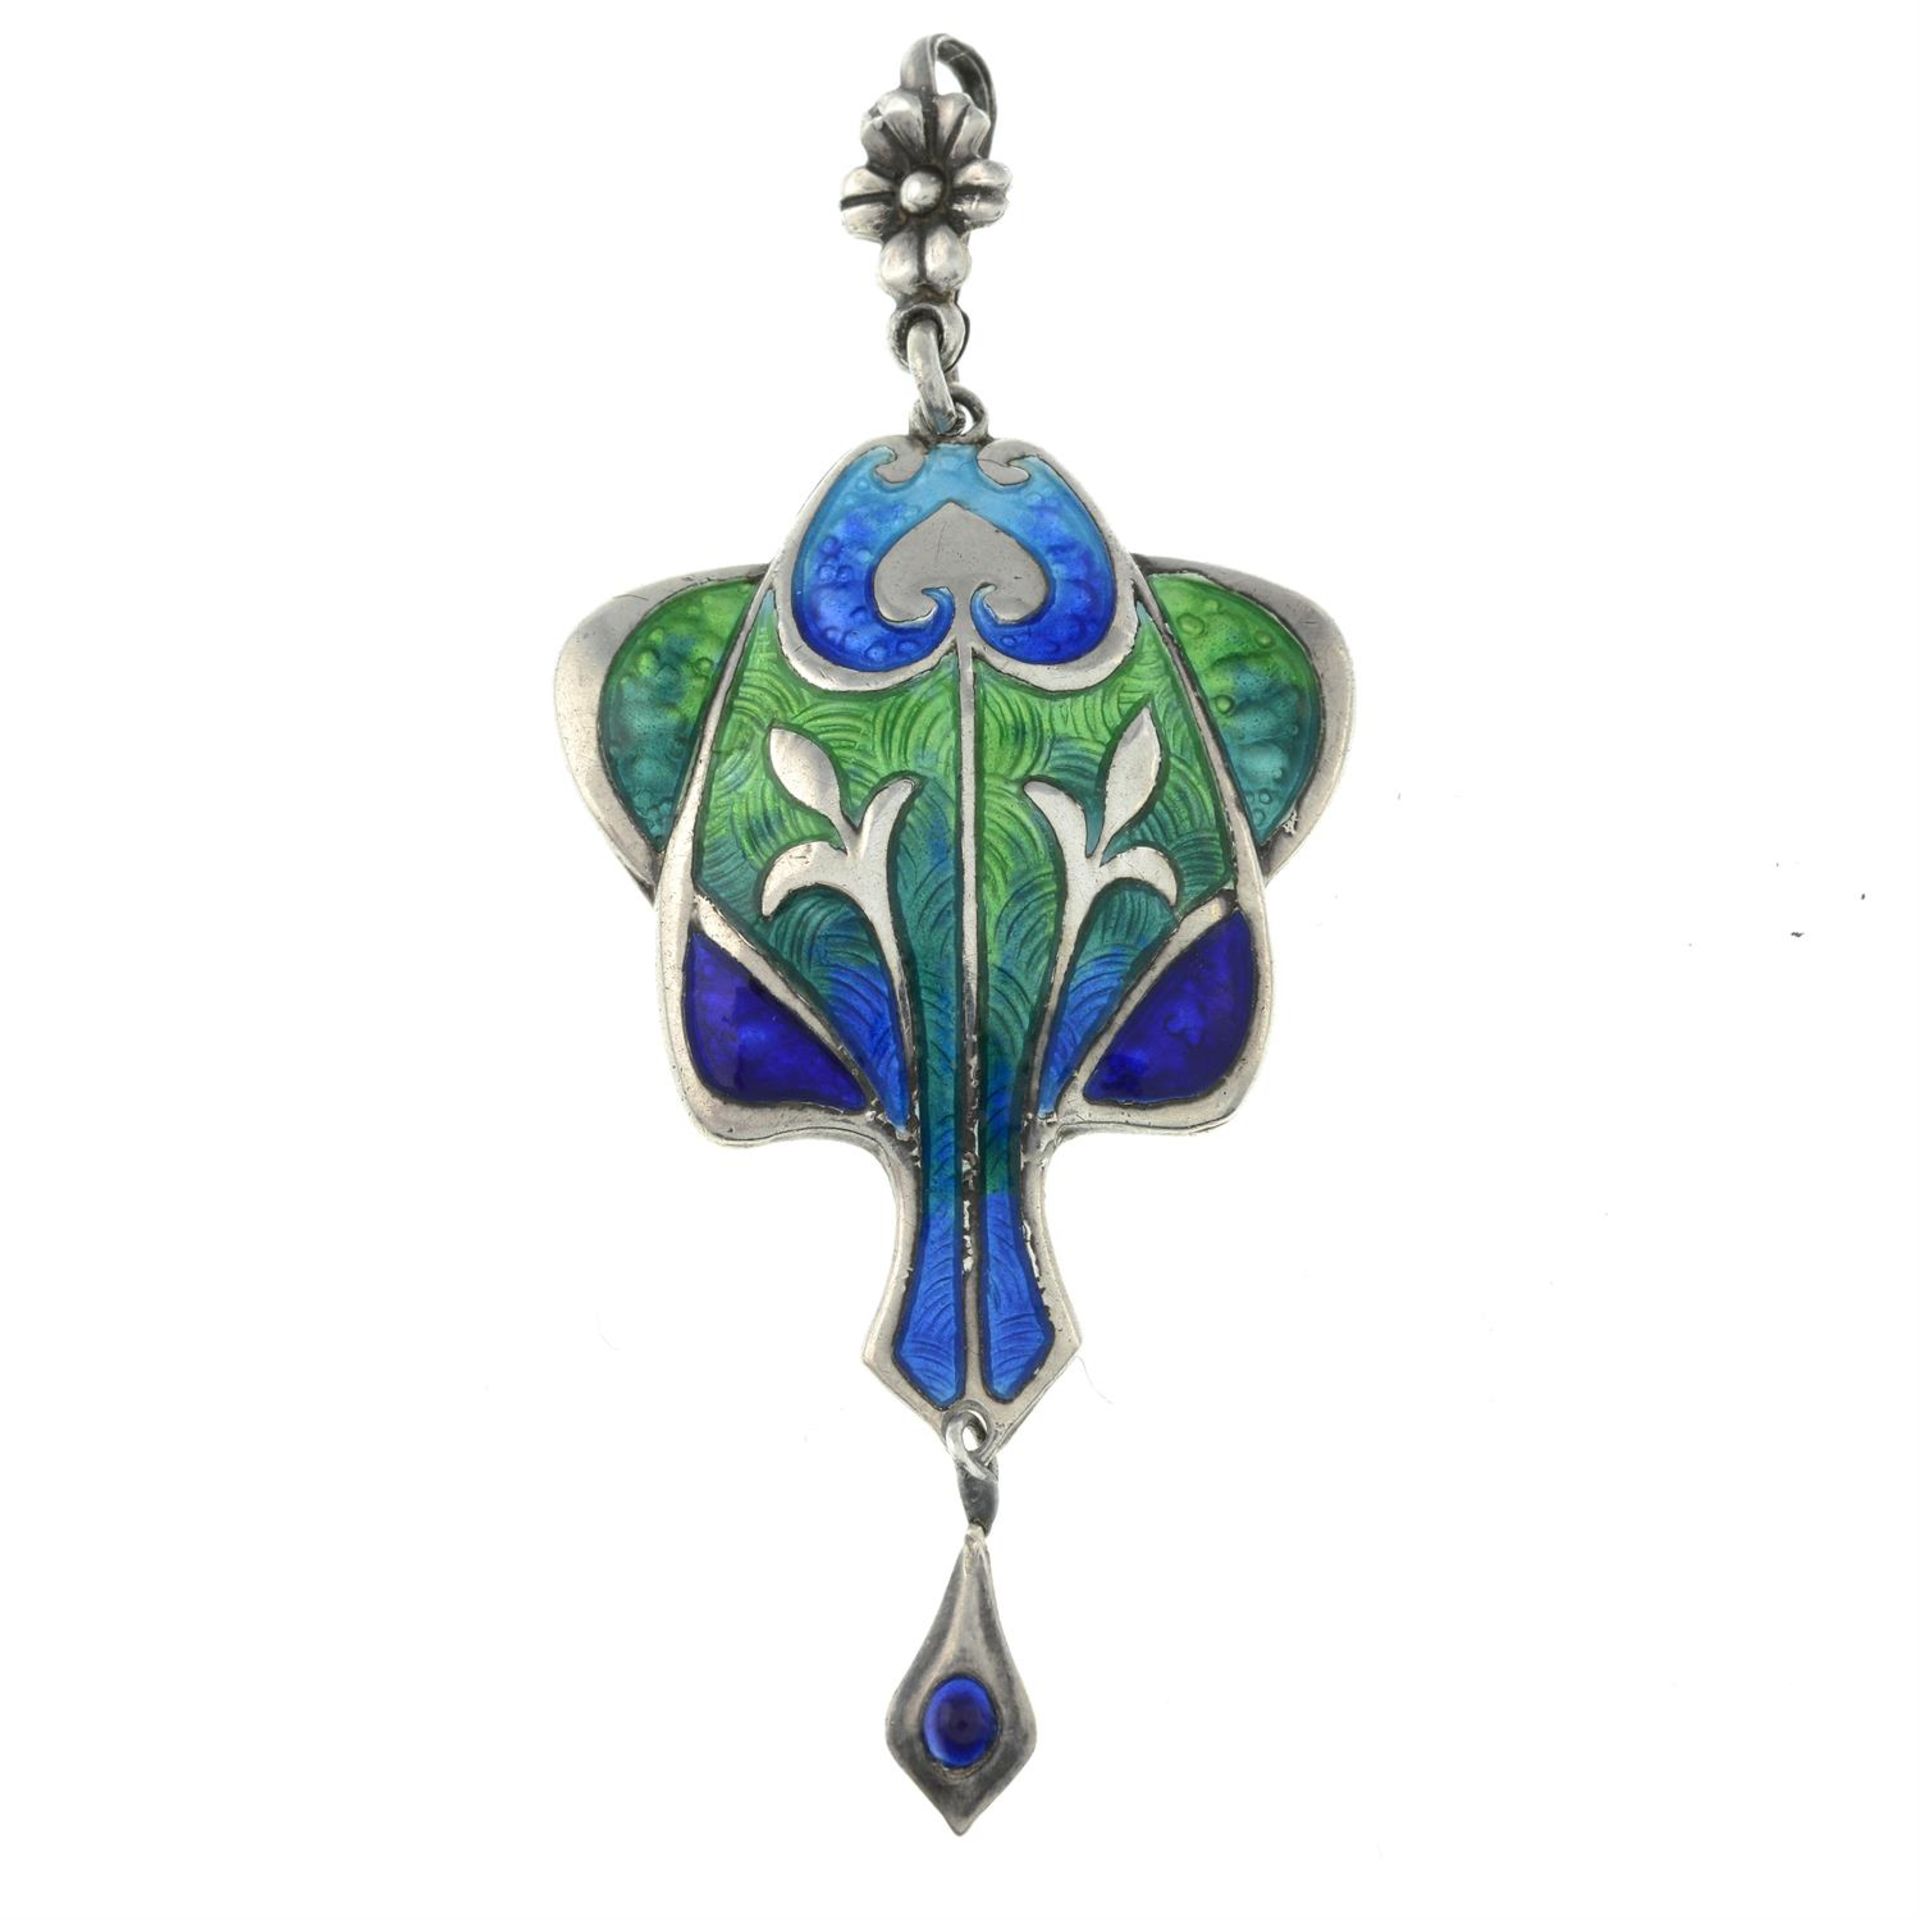 An Arts and Crafts silver and enamel pendant, by Smith and Ewan.